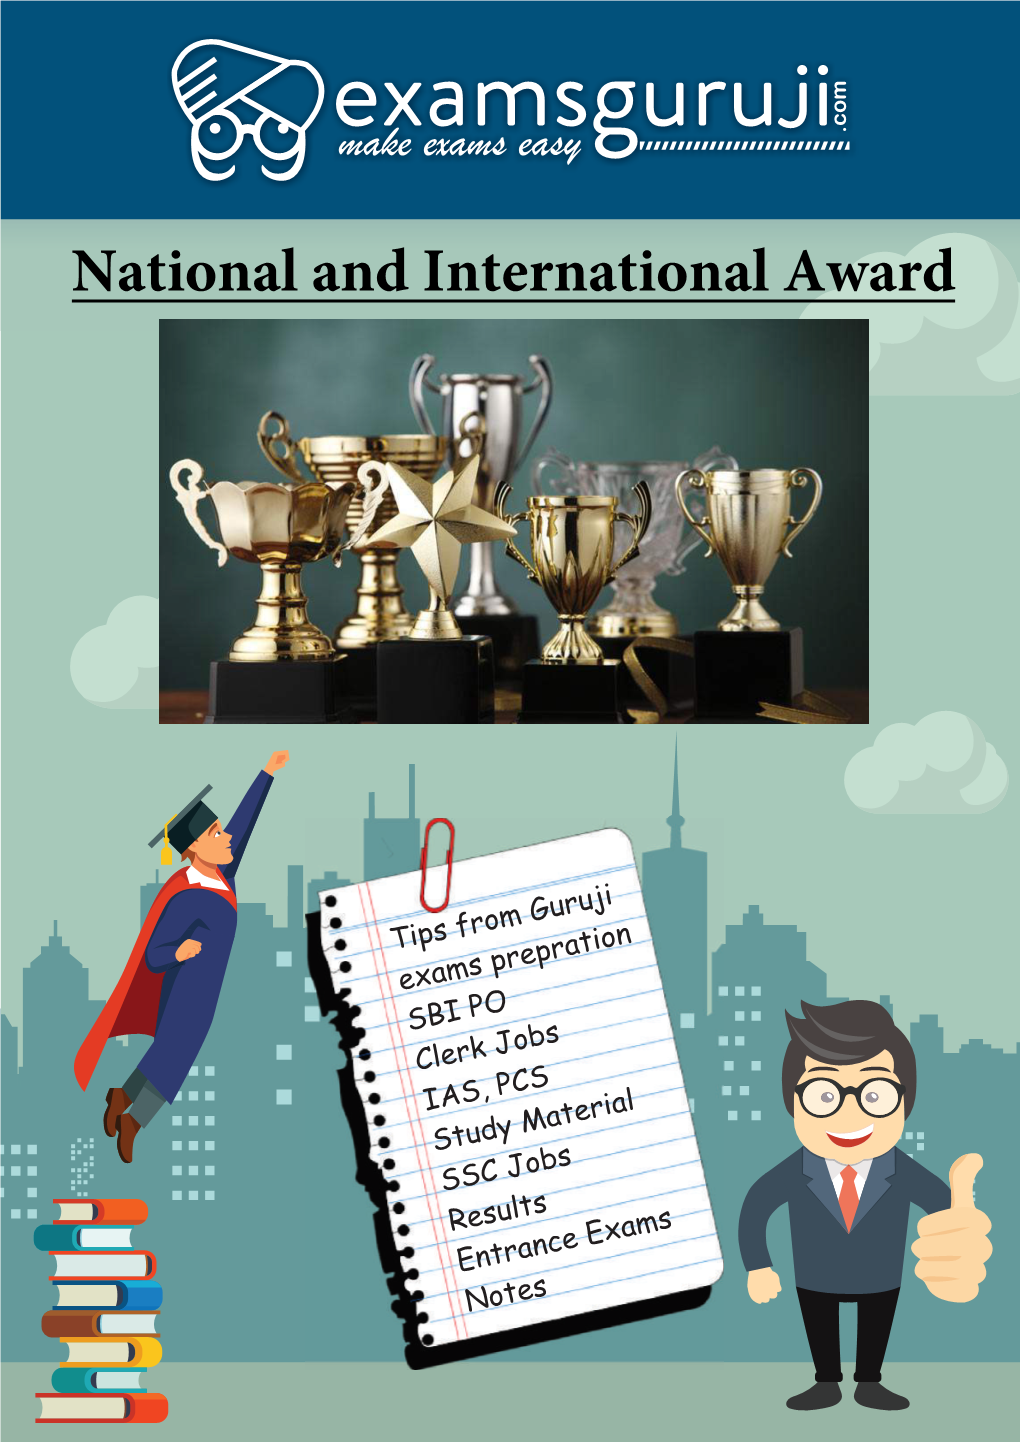 National and International Award Complete List